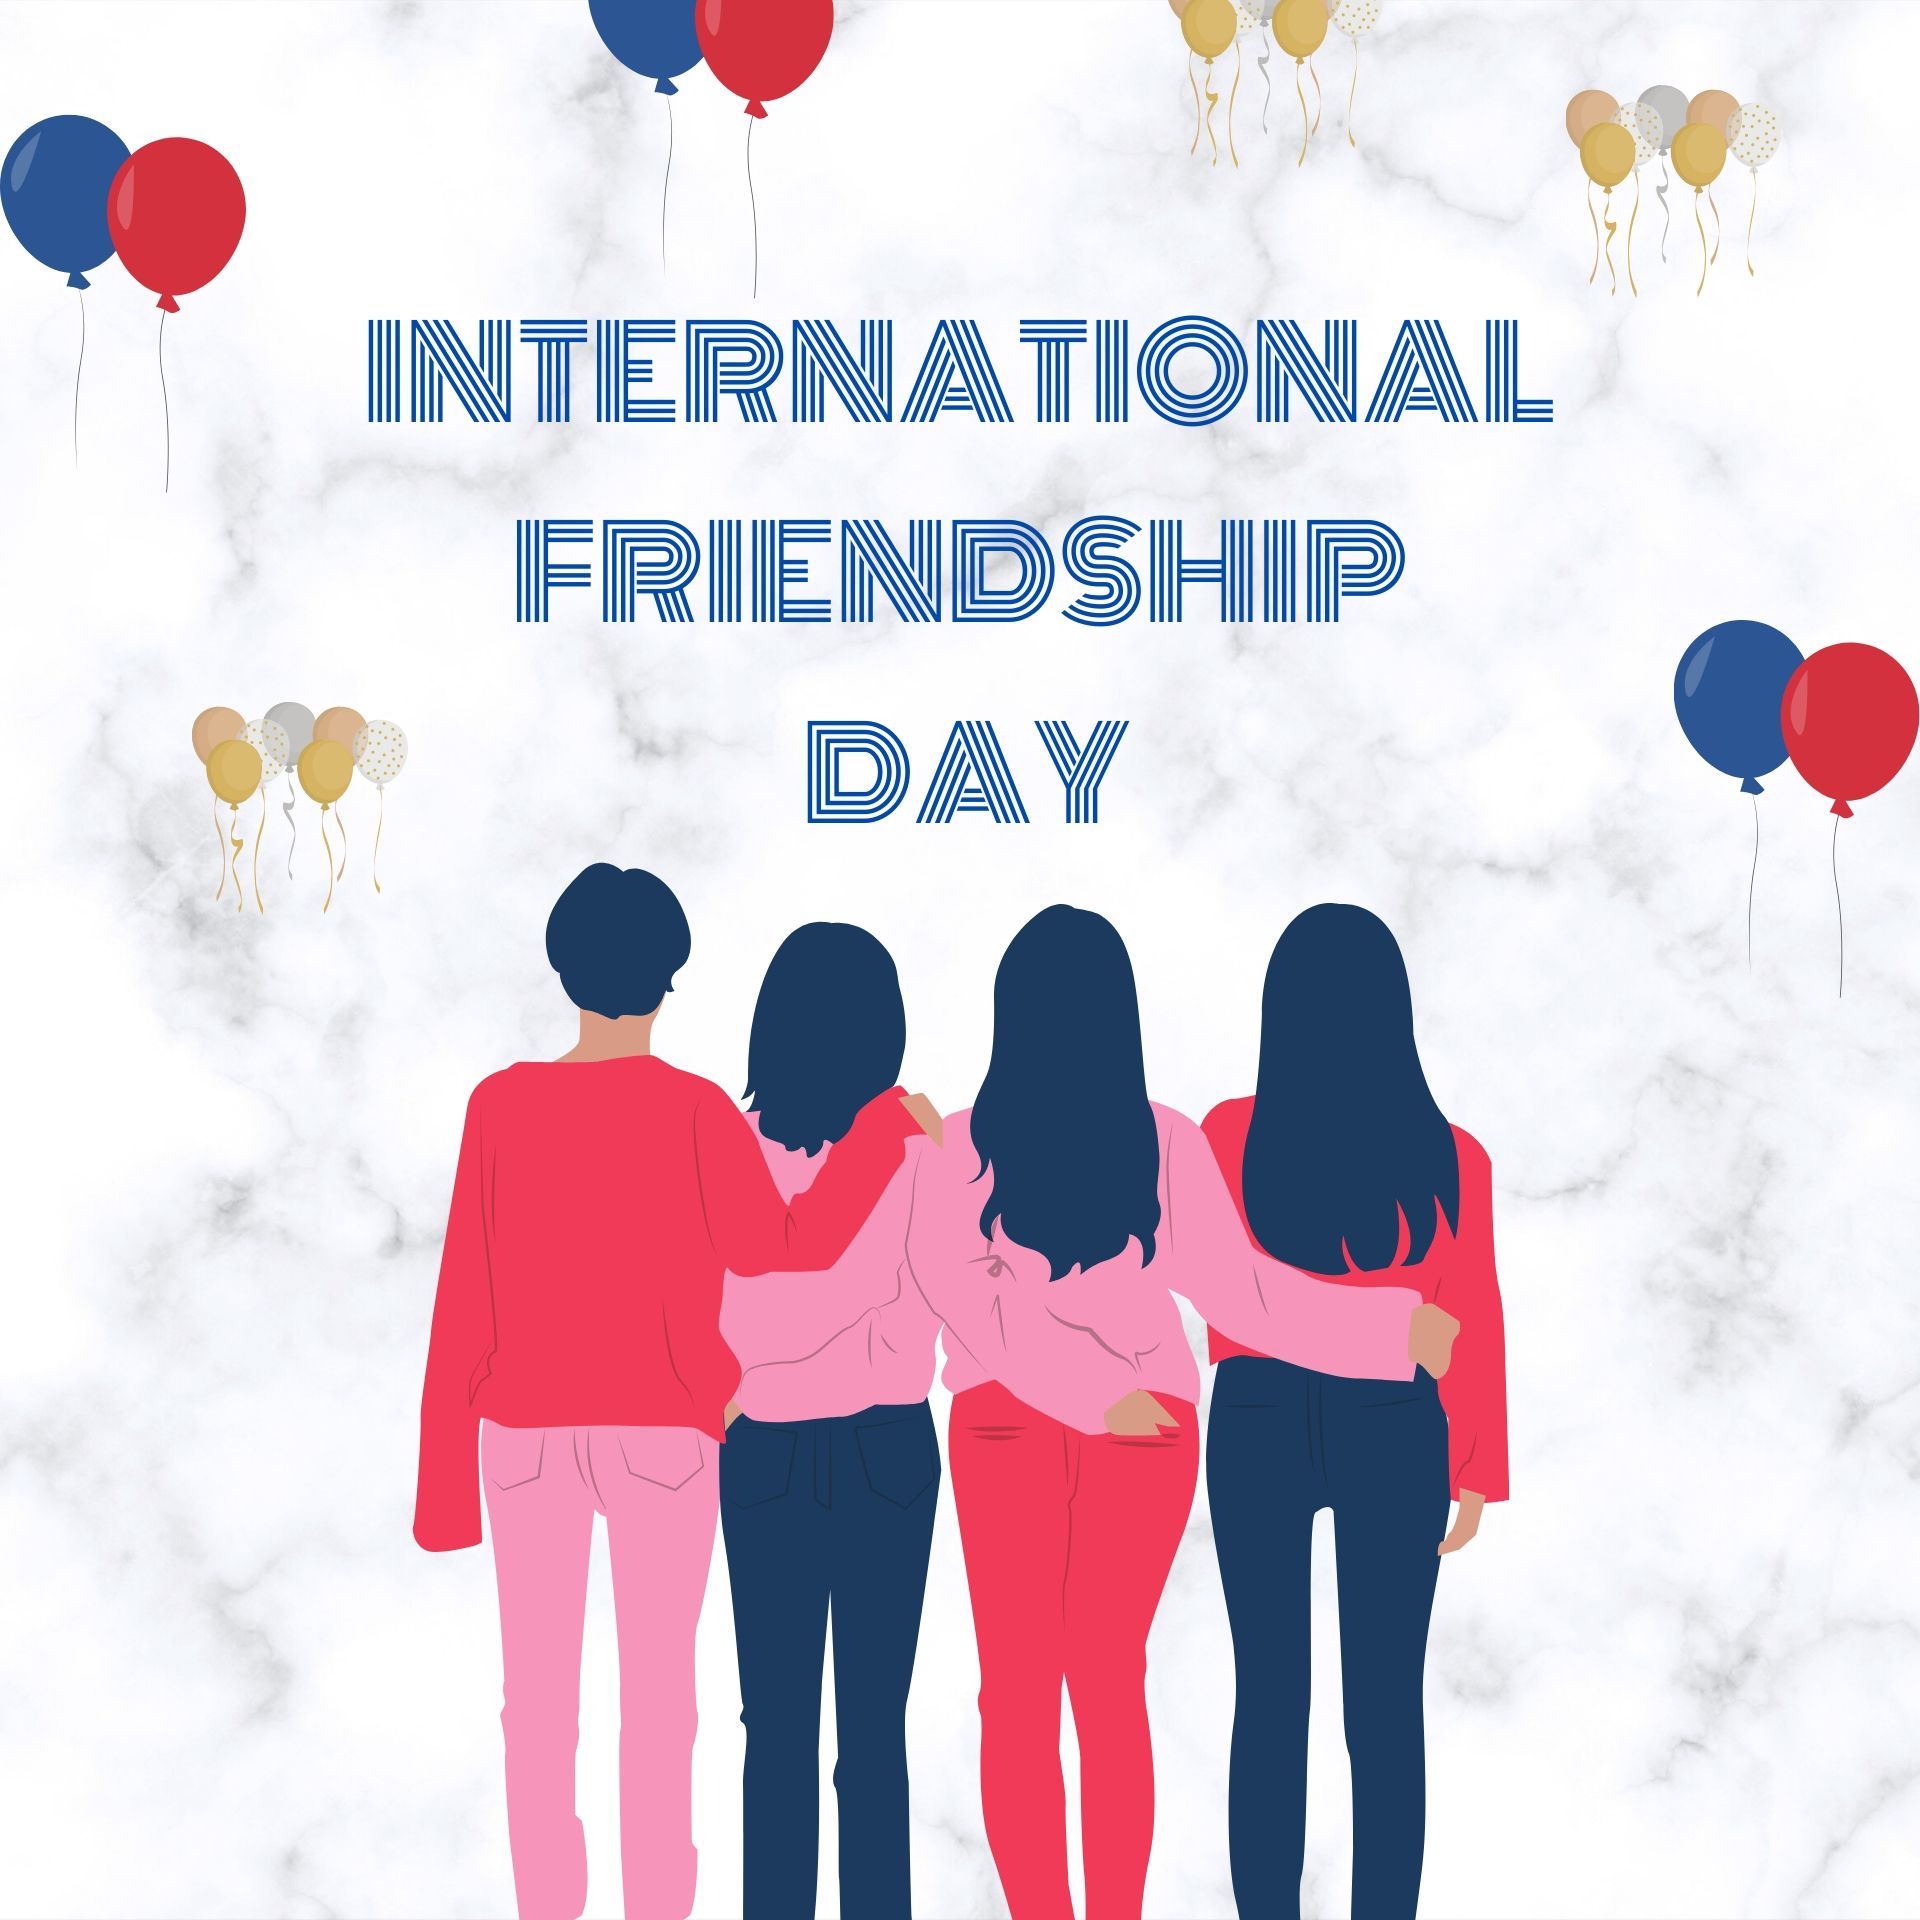 Happy Friendship Day 2021 Wishes, image, quotes, status